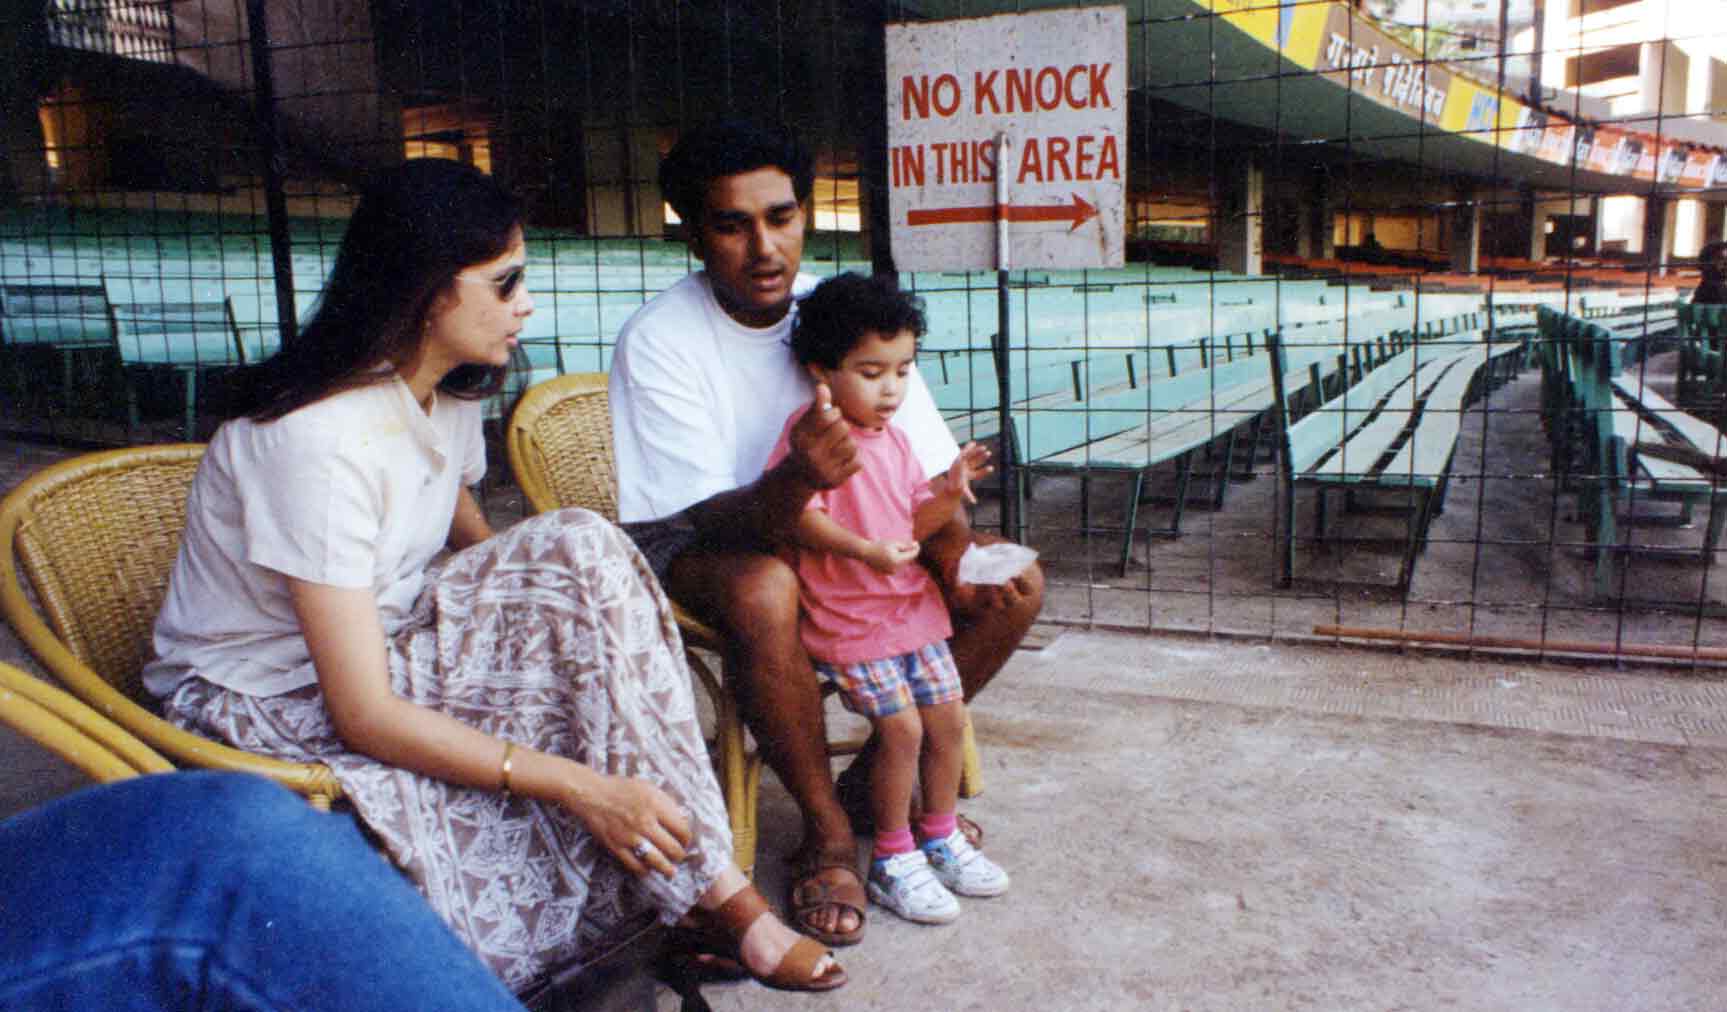 Apart from his flourishing career as a commentator, Sanjay Manjrekar is also known as a family man and a doting father.